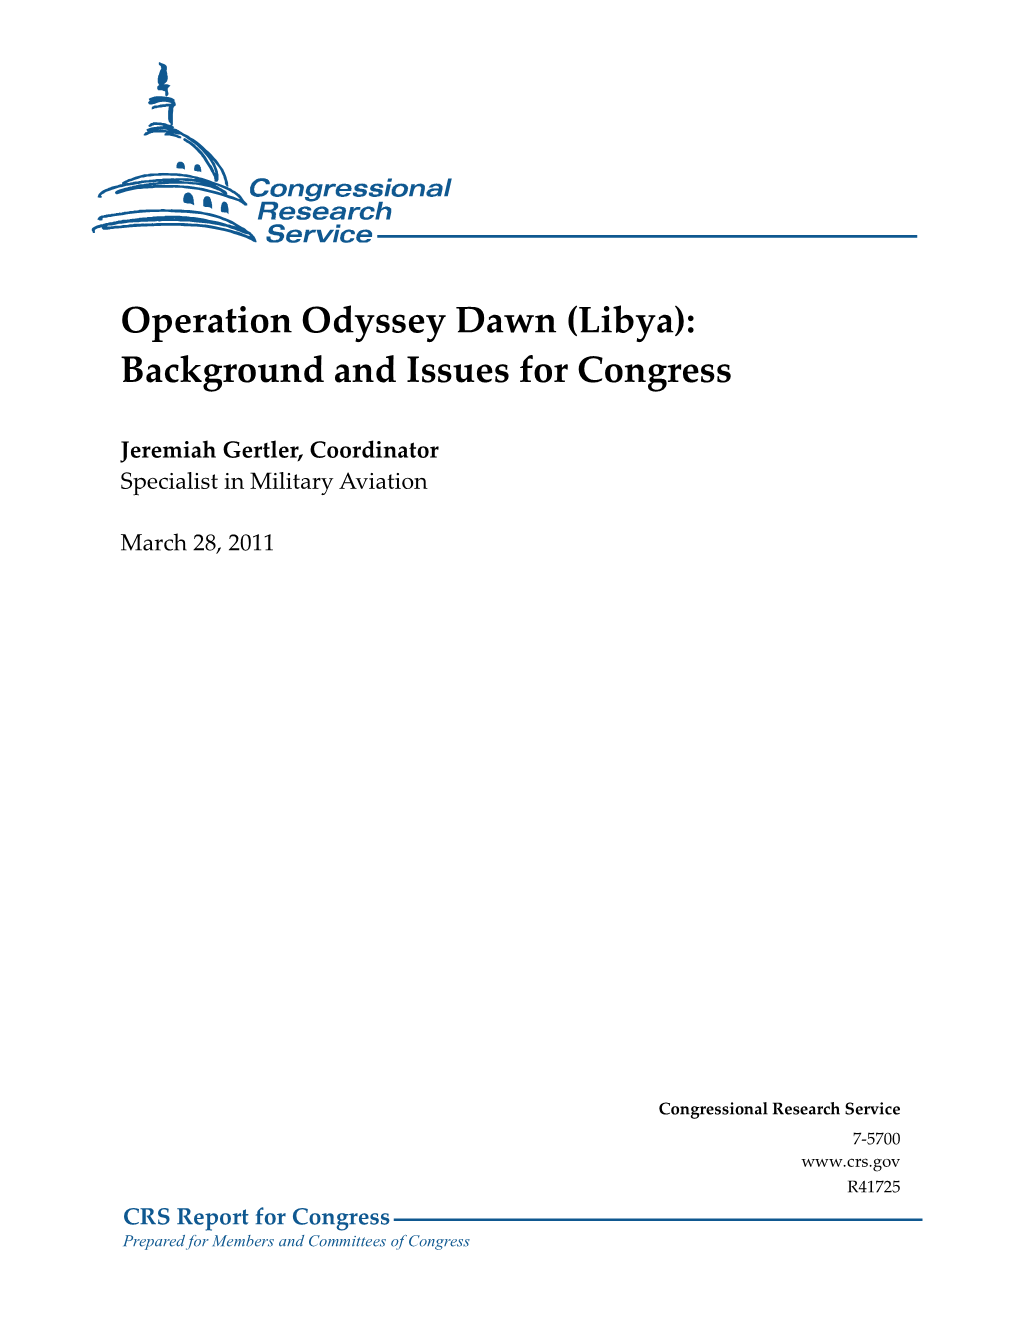 Operation Odyssey Dawn (Libya): Background and Issues for Congress